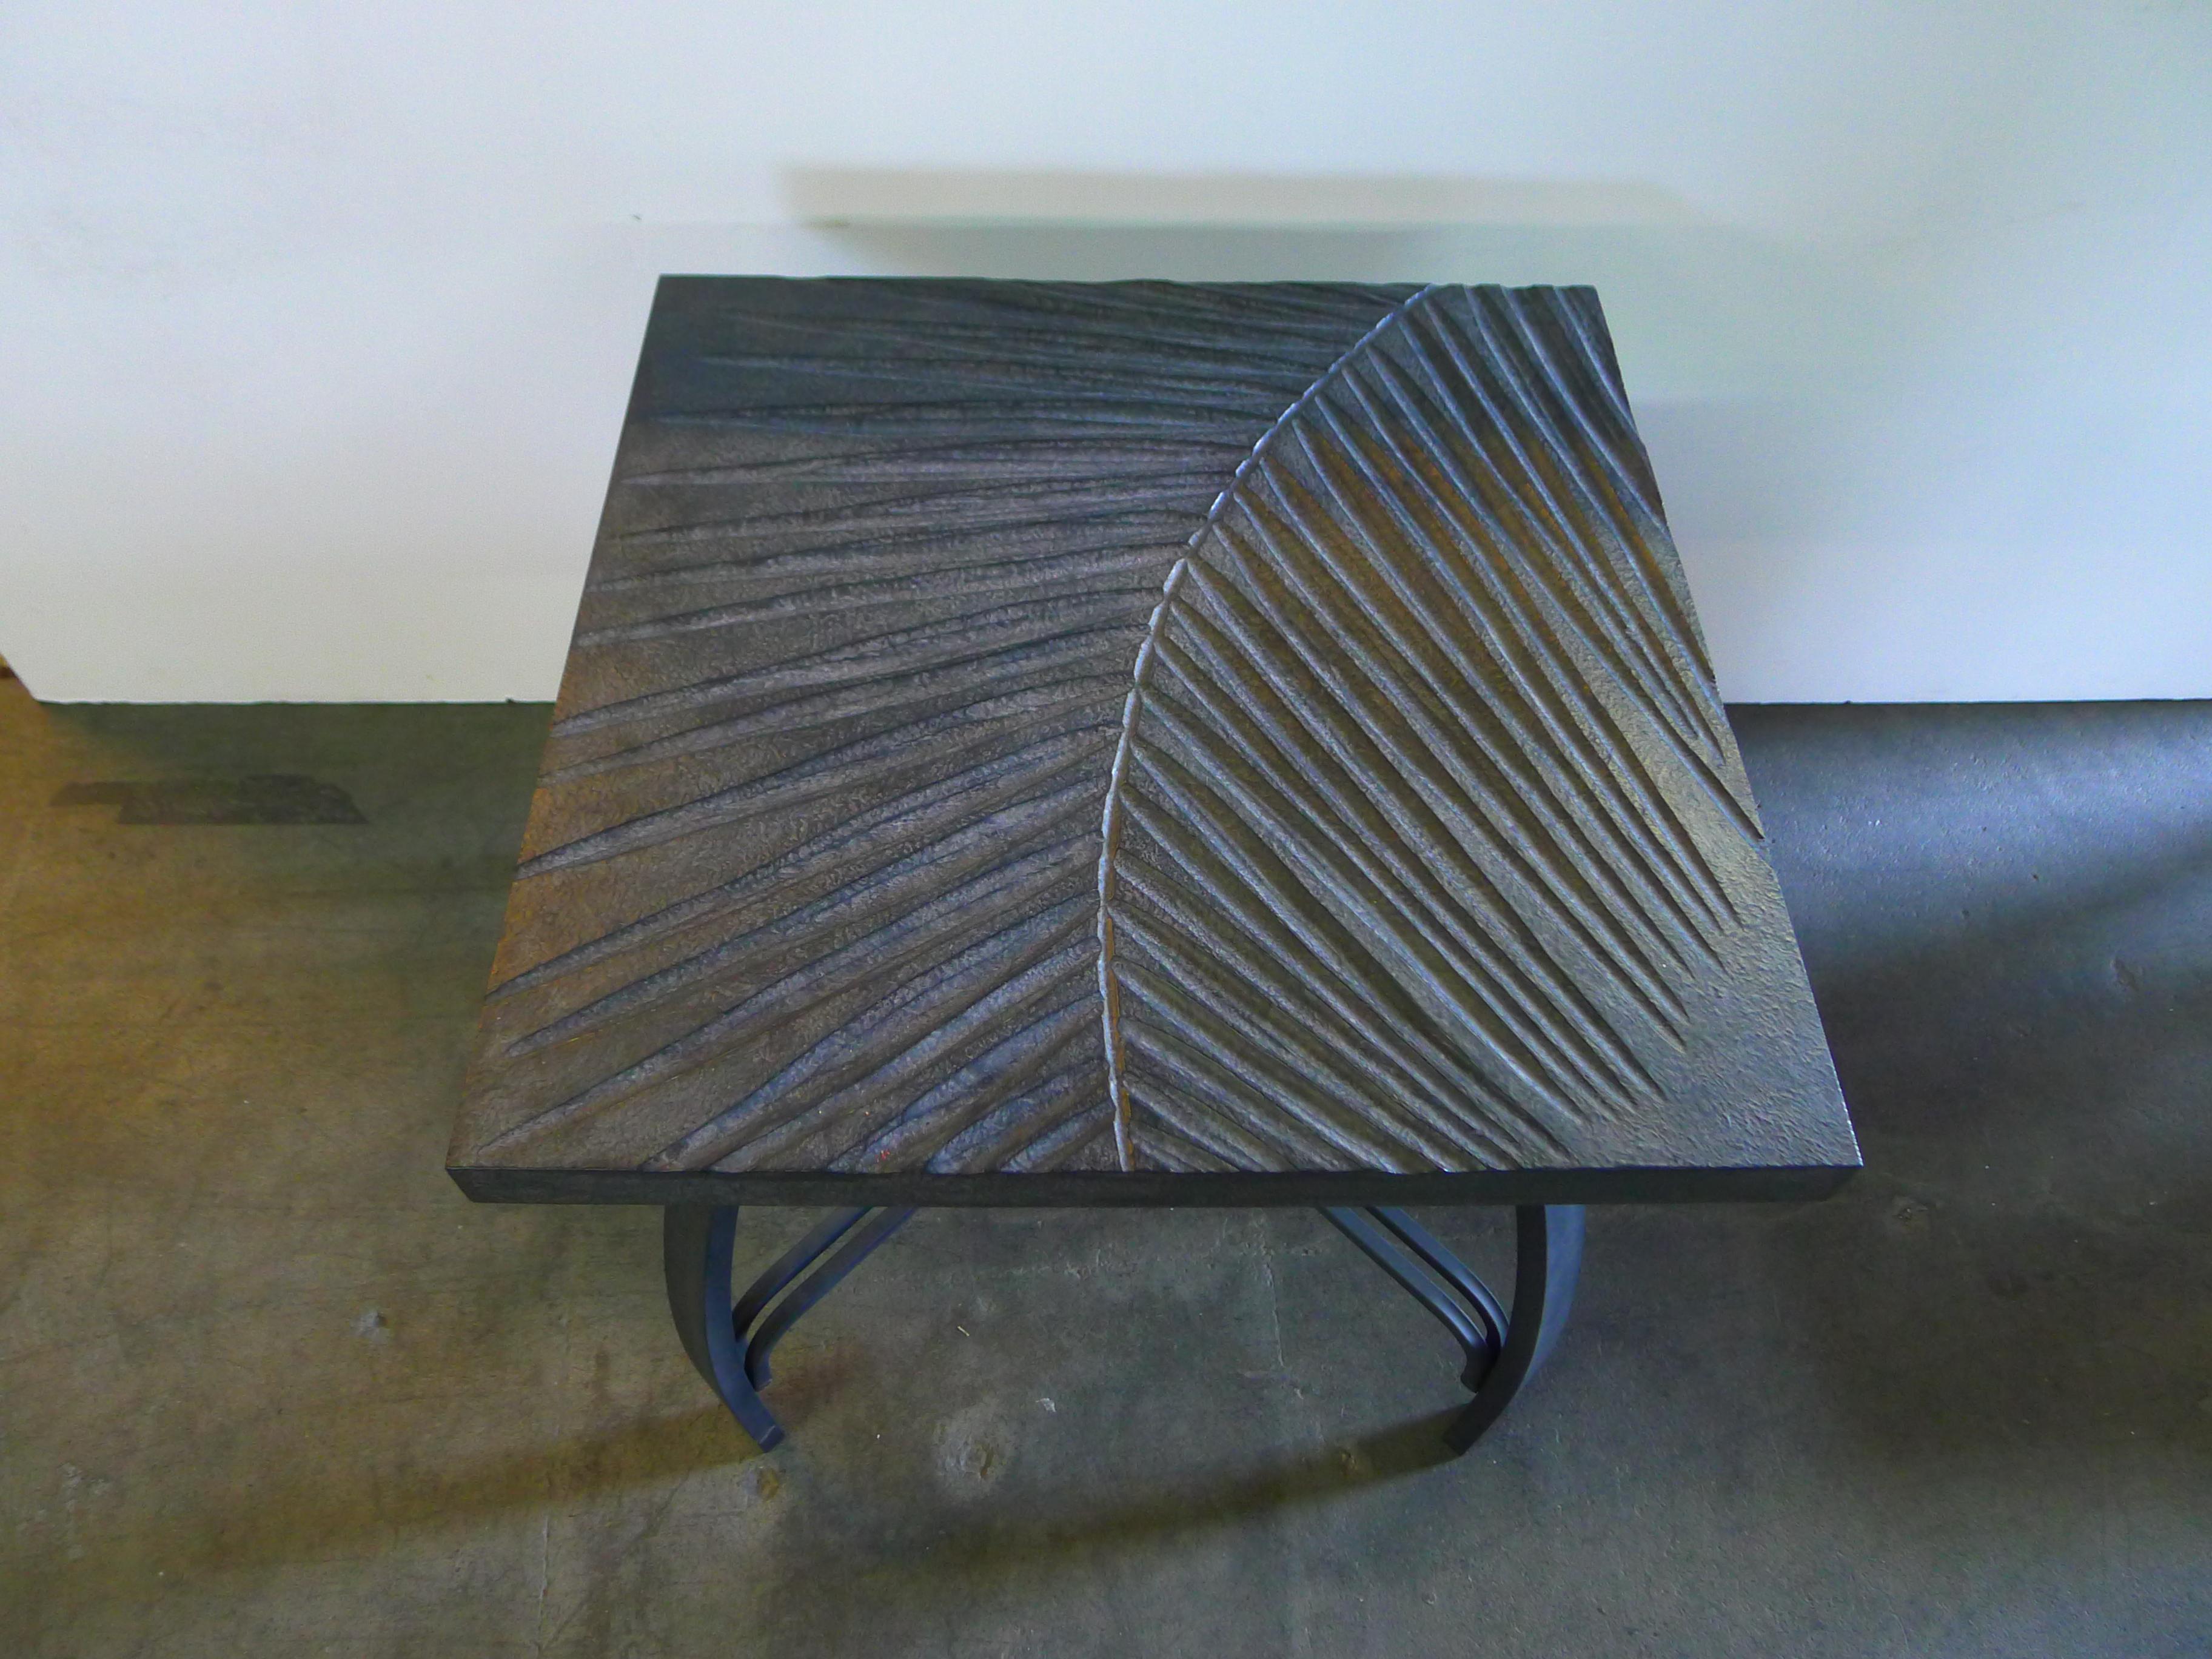 Hand carved fossilized frond side table that can also be customized as a cocktail table. By order. Each tabletop is hand carved wood in gray slate coloration, and with iron base. Also can be placed outdoors in undercover location. This is a